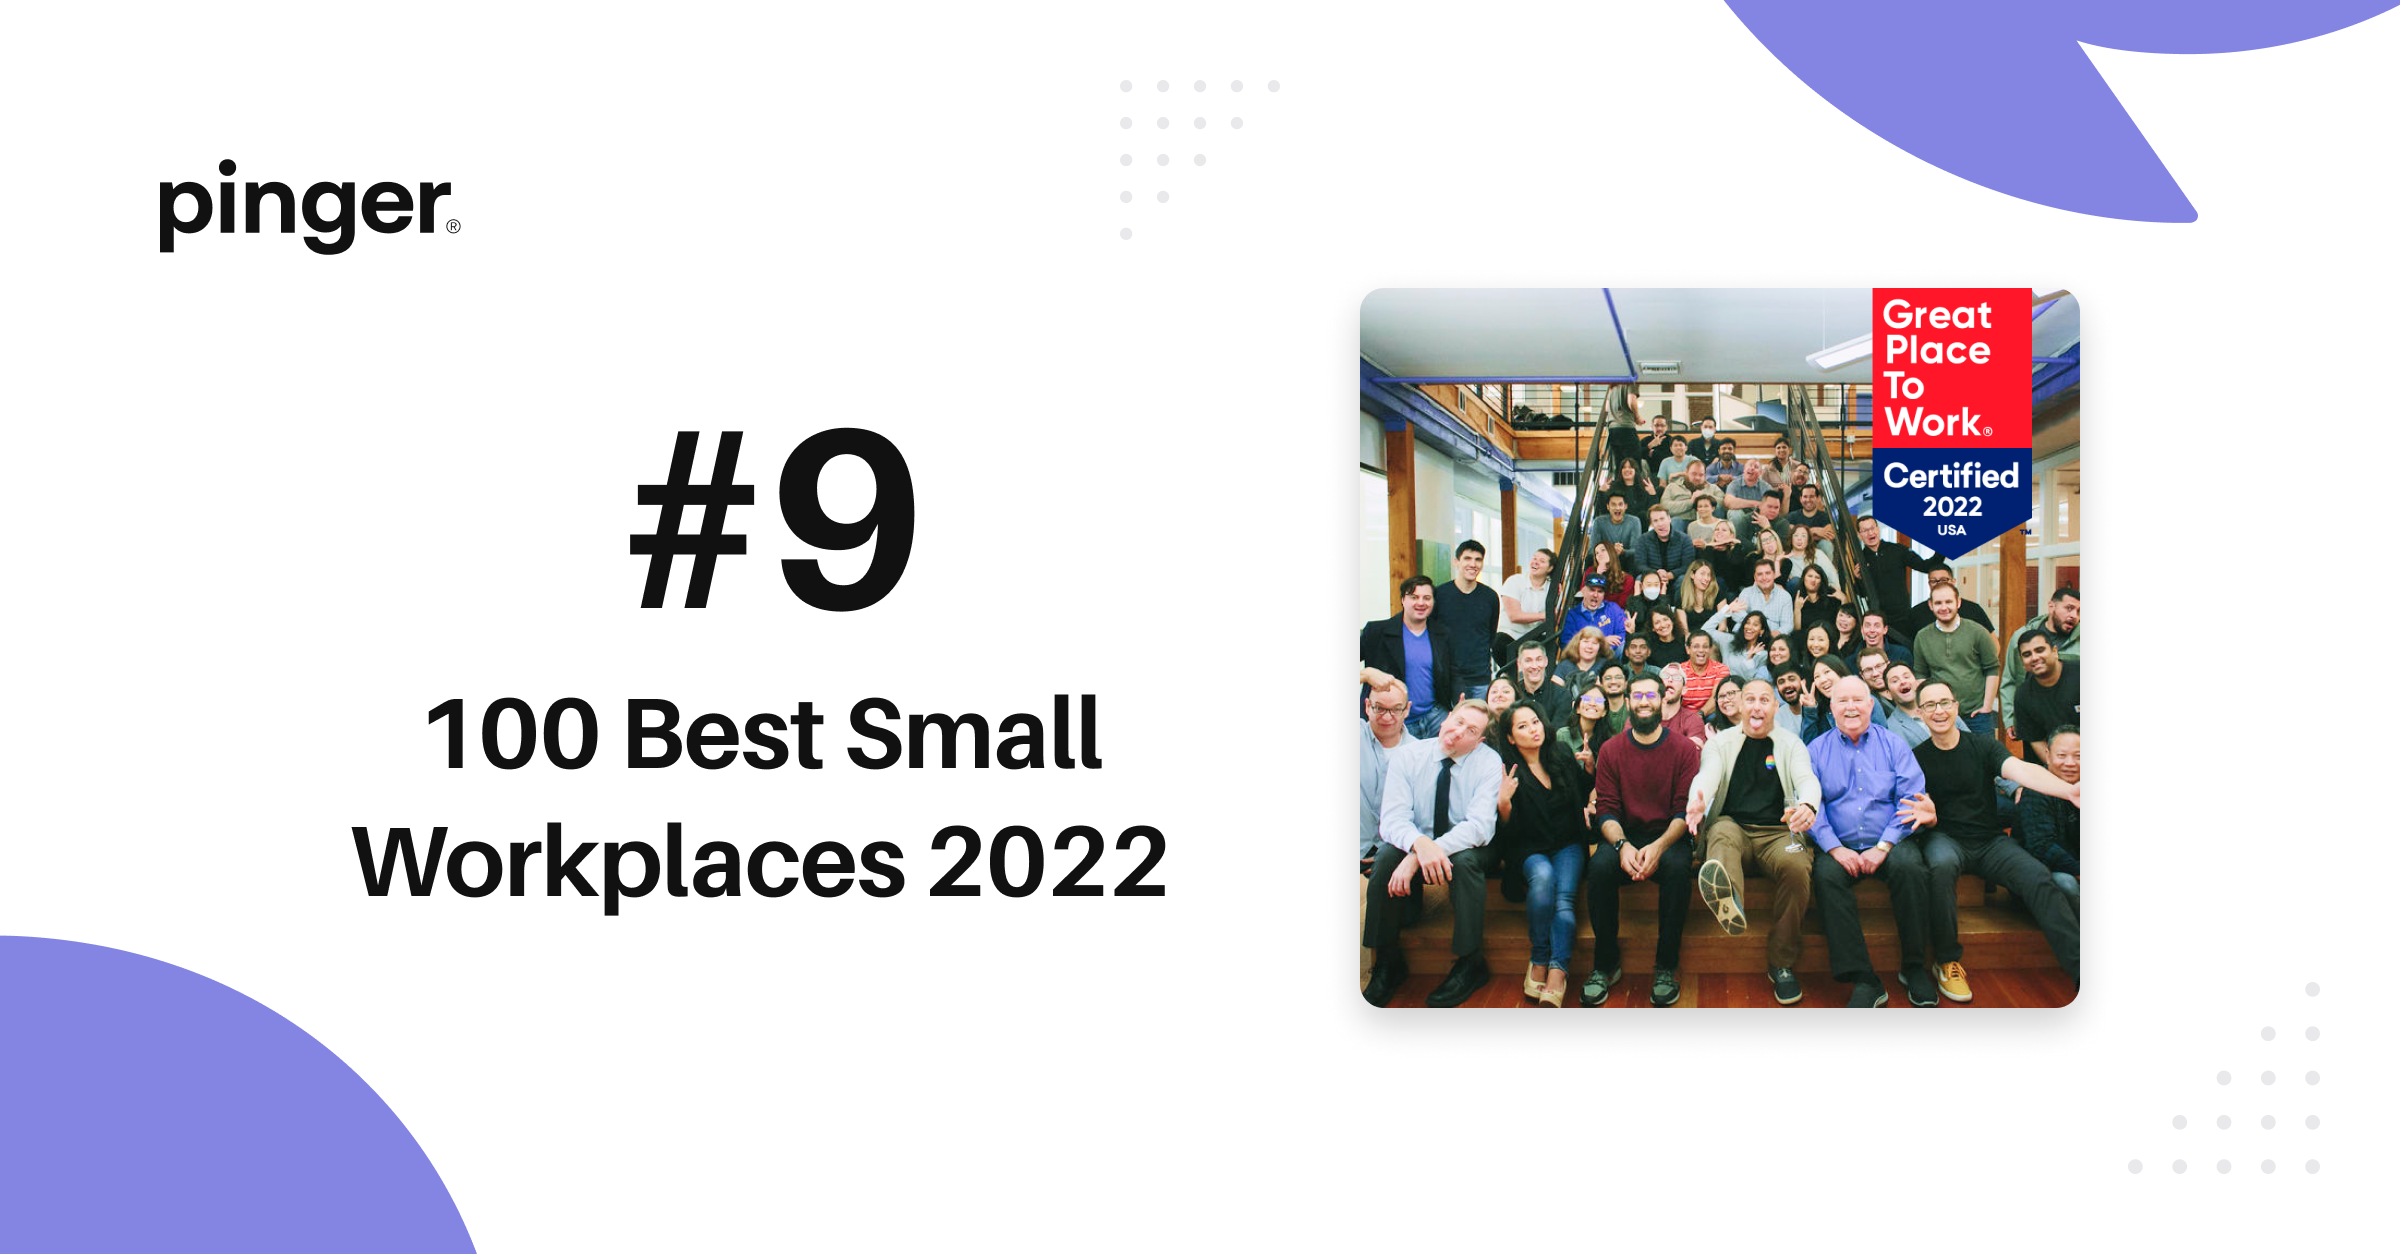 Pinger Ranks 9th in Best Small Workplace